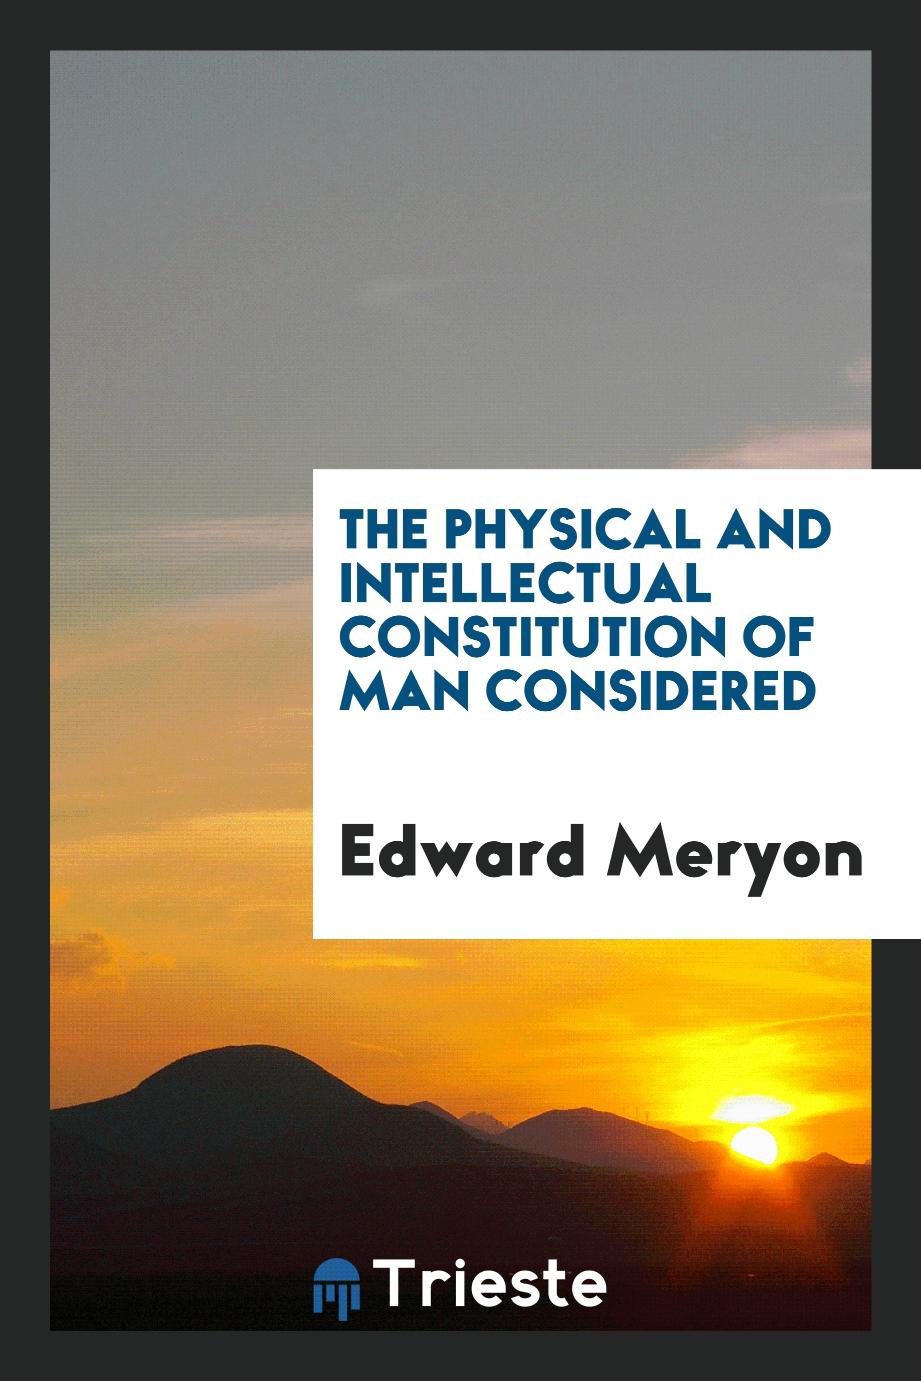 The physical and intellectual constitution of man considered